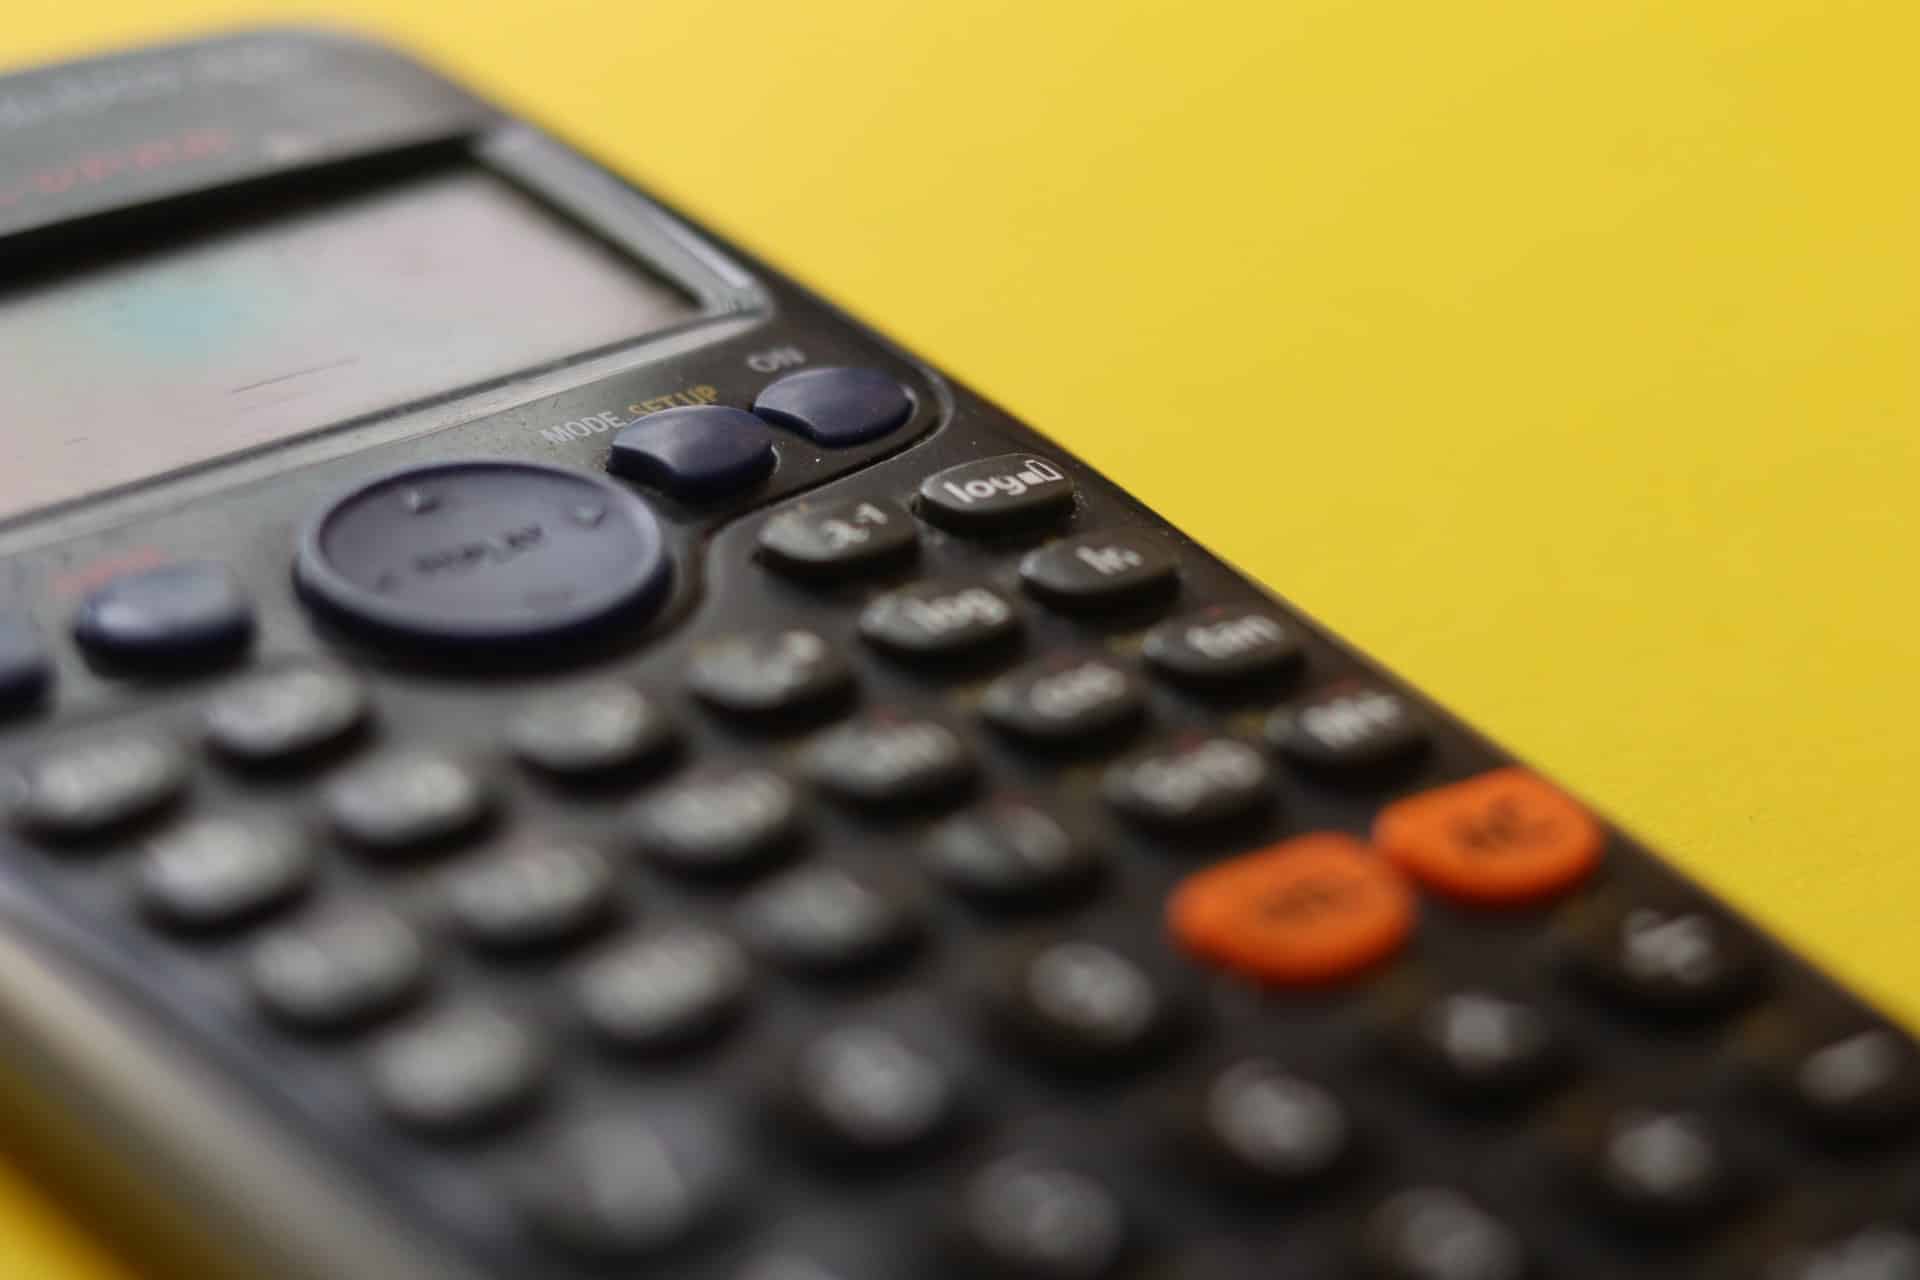 Calculator representing whether to deduct CERB benefits from a wrongful dismissal award